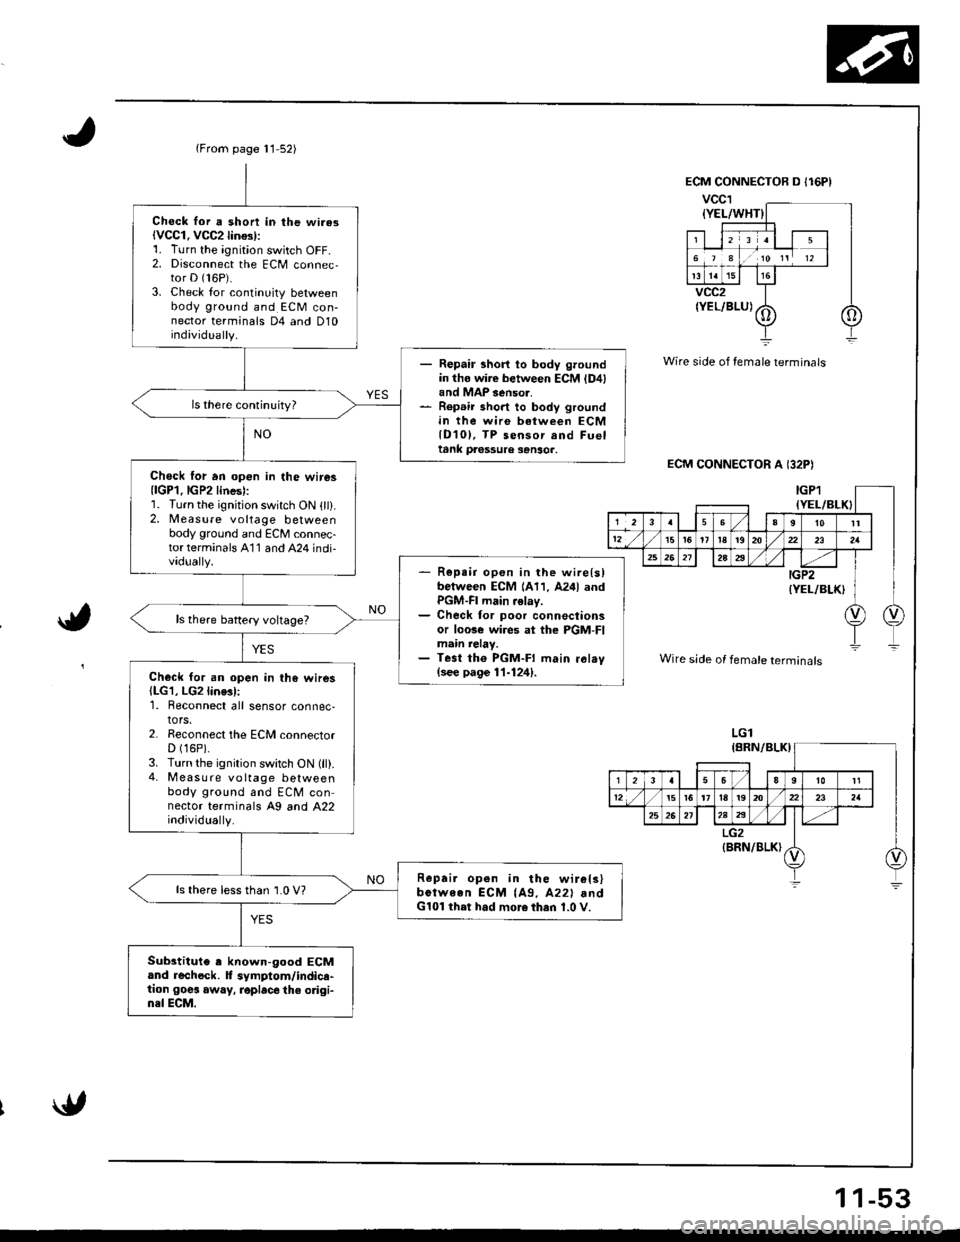 HONDA INTEGRA 1998 4.G Owners Guide {From page 11 52)
Chock lor a shon in lhe wi.asiVCC1. VCC2lin$l:1. Turn the ignition switch OFF-2. Disconnect the ECM connec,tor D (16P).
3. Check lor continuity betweenbody ground and ECM con-nector 